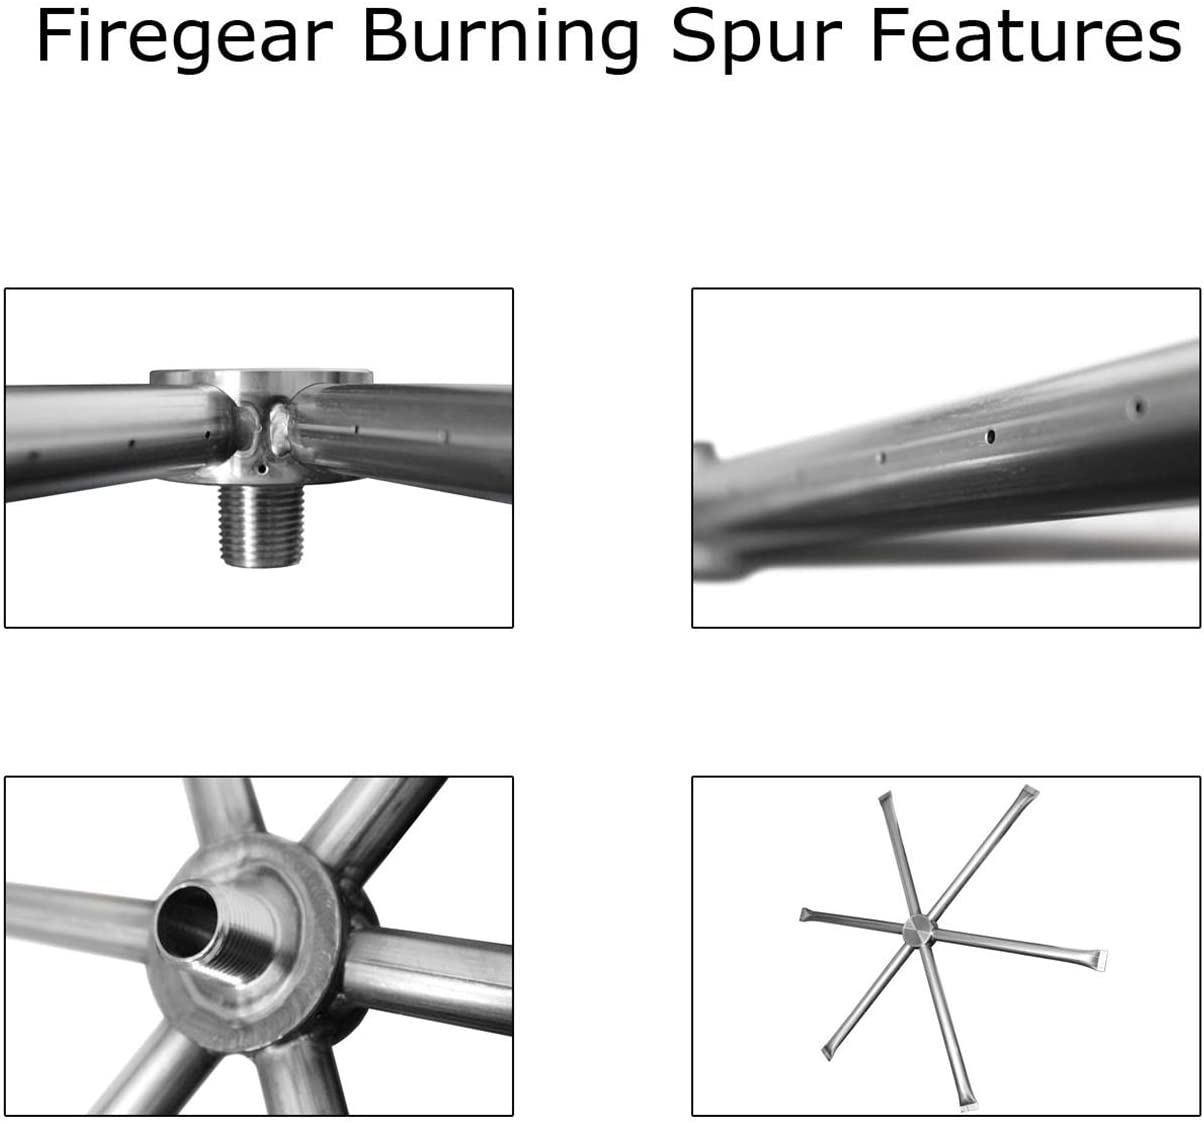 Firegear Stainless Steel Round Pan and Spur Burner Firegear - 29" Pan with 22" SS Burning Spur, MT Ignition, for NG (LP Kit Purchase FGLPK41)